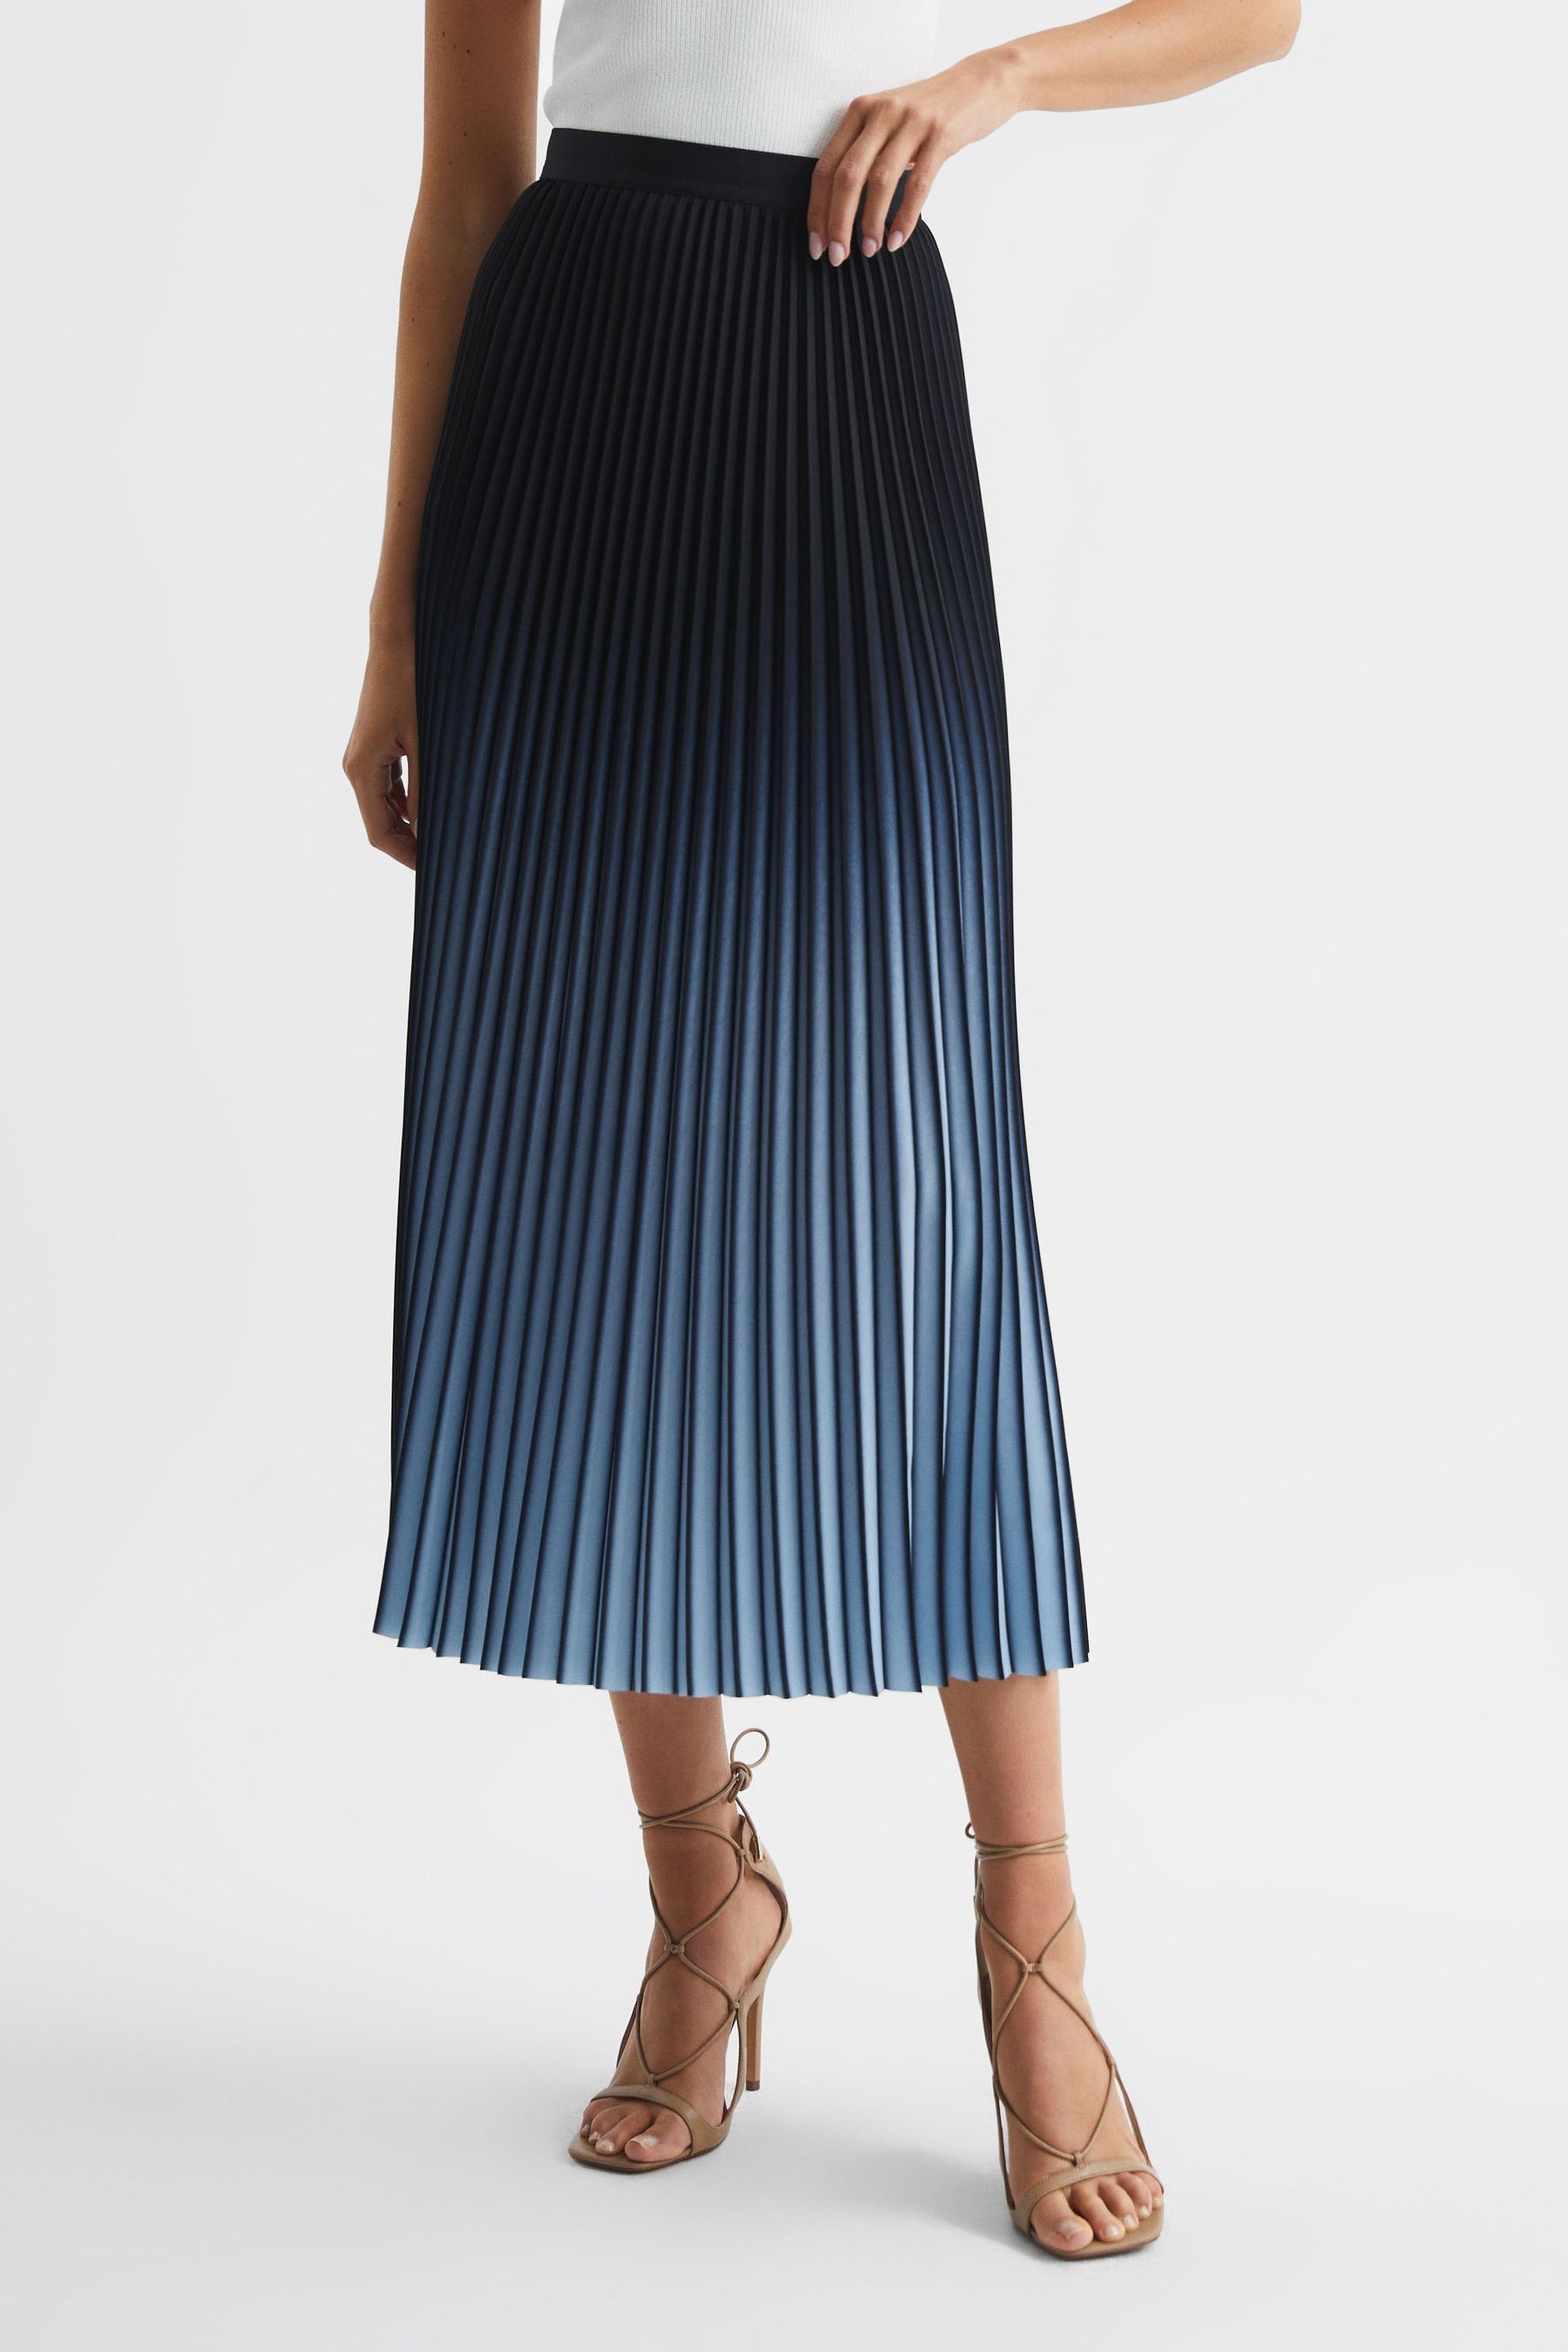 Shop Reiss Marlie - Bright Blue Ombre Pleated Midi Skirt, Us 10